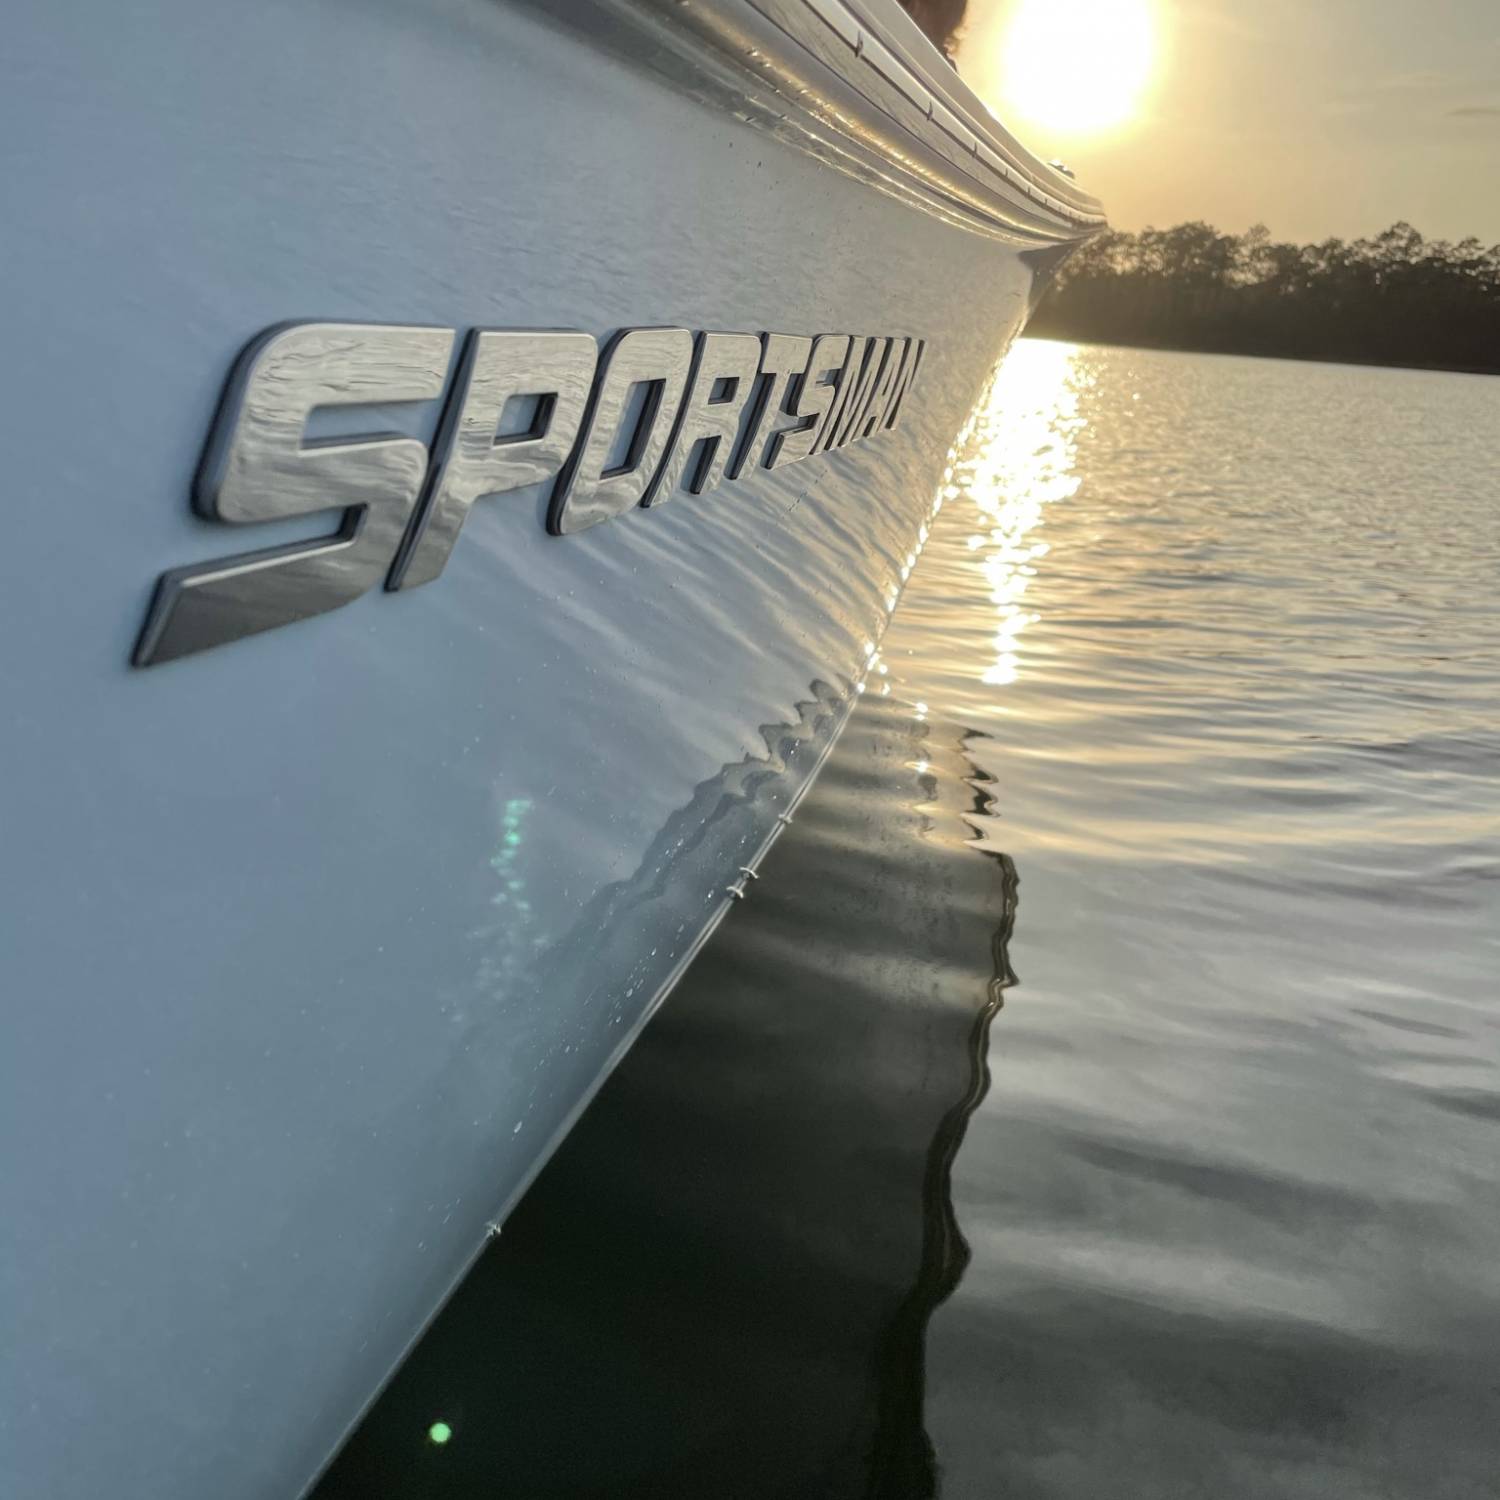 Title: Sunset Cruise - On board their Sportsman Heritage 211 Center Console - Location: Perdido Beach, AL. Participating in the Photo Contest #SportsmanApril